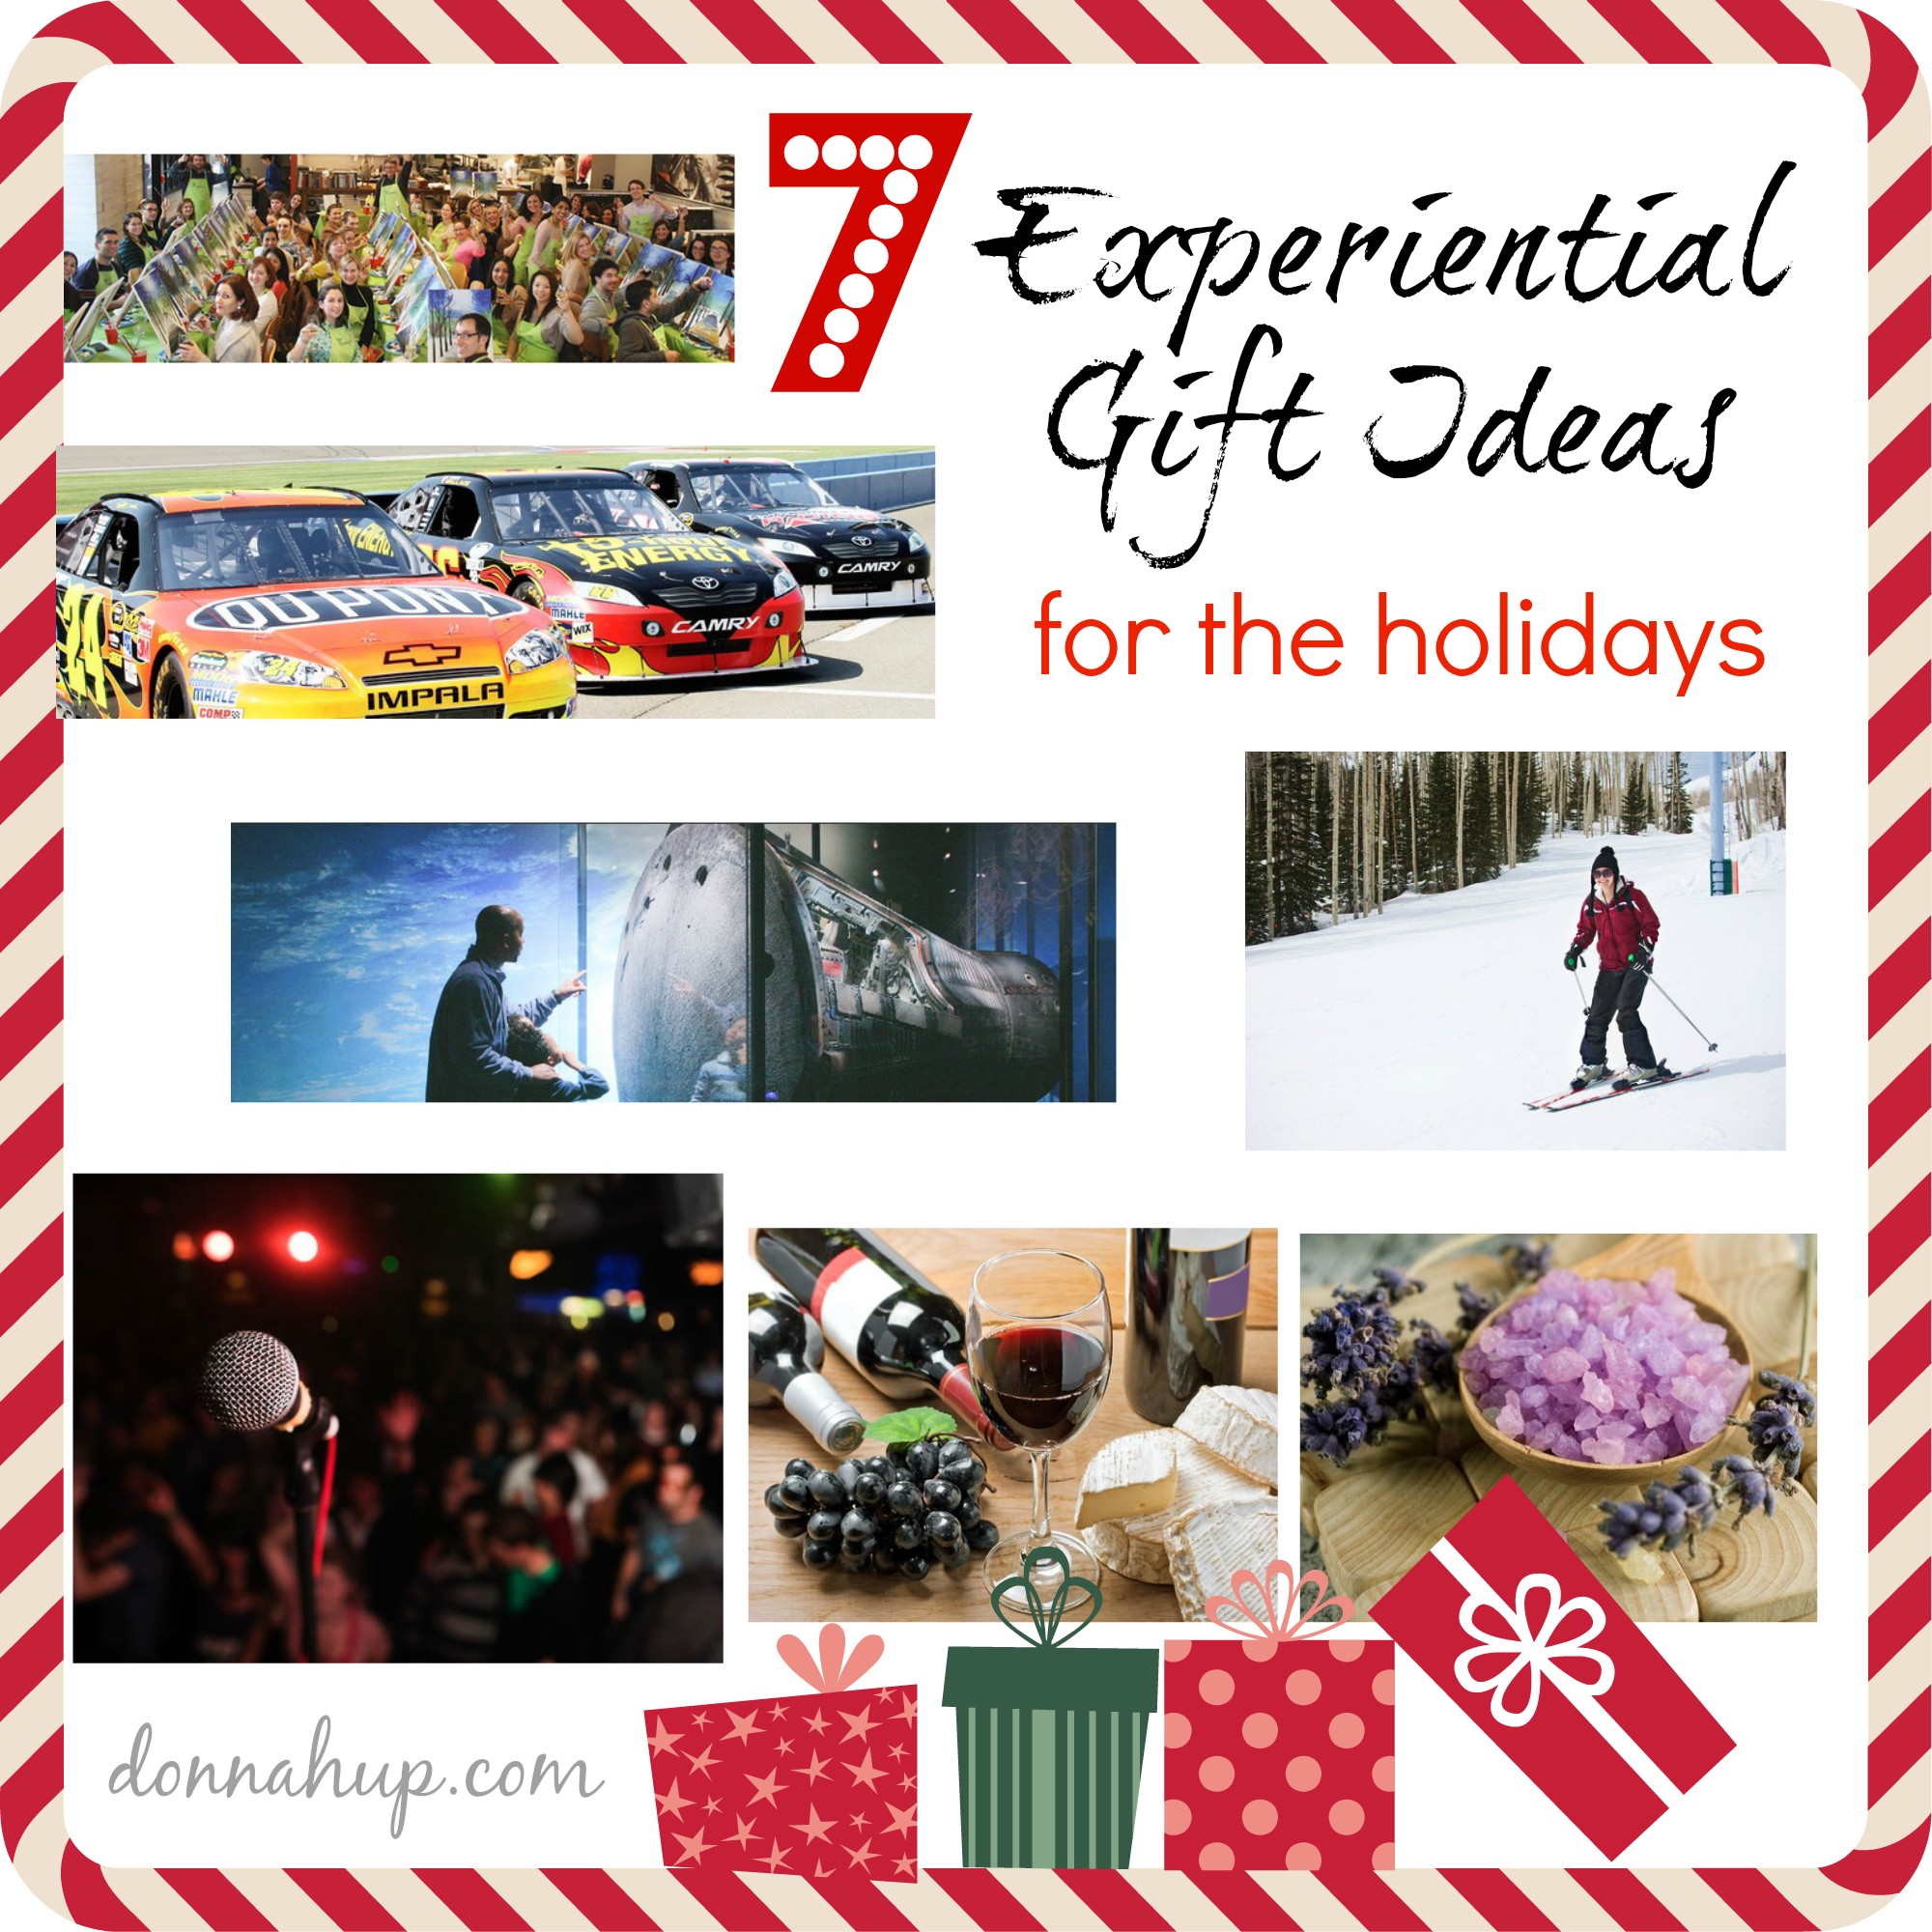 7 Experiential Gift Ideas for the Holidays